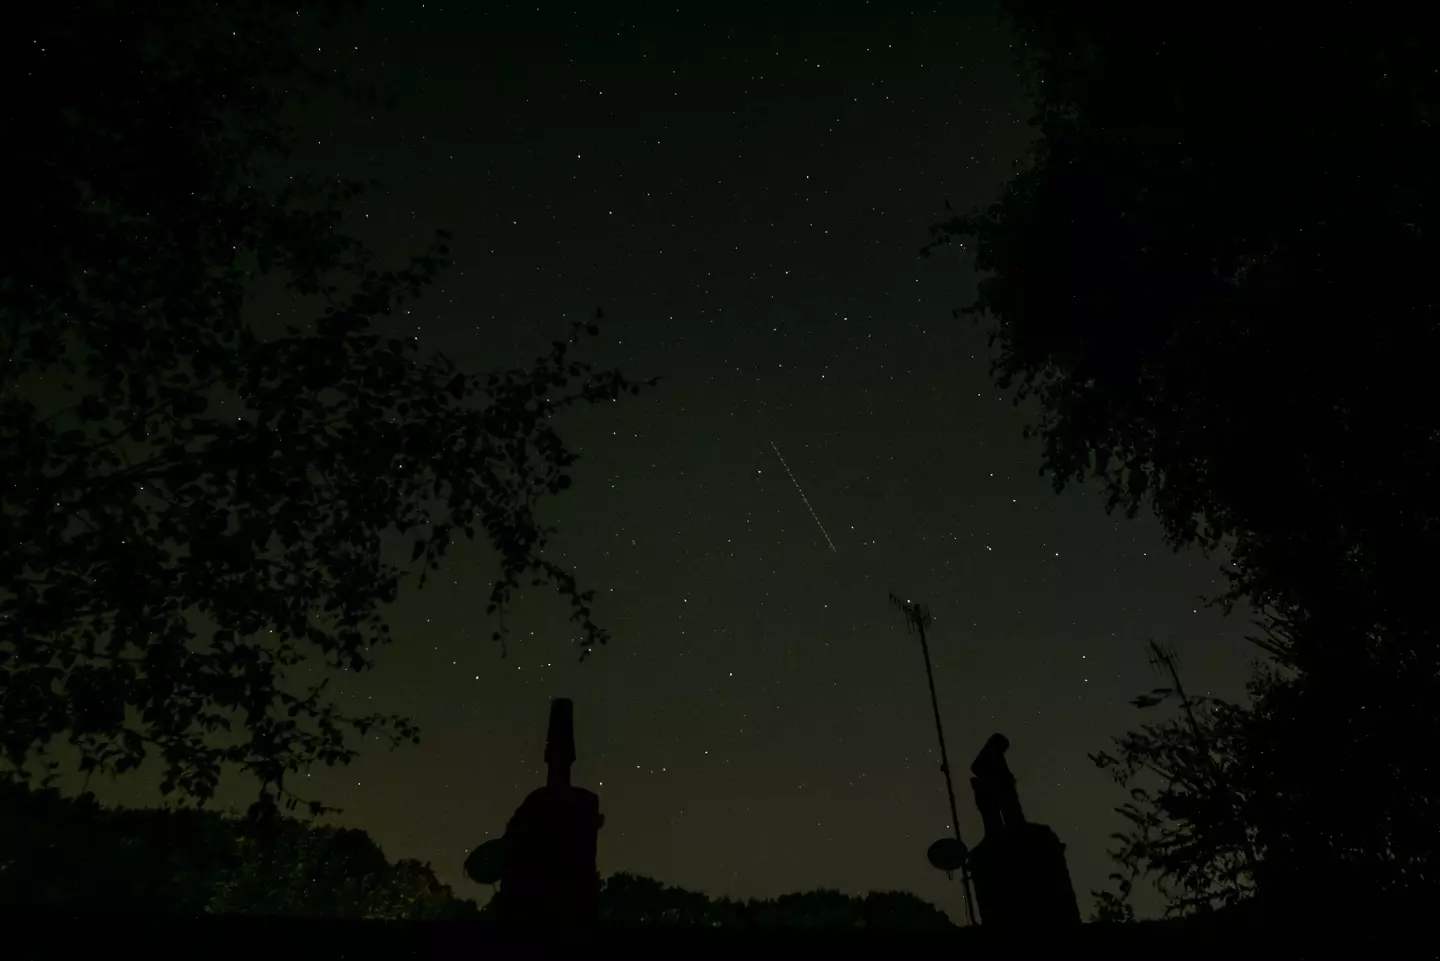 One of the Draconids pictured in the skies above Yorkshire during 2020's meteor shower.